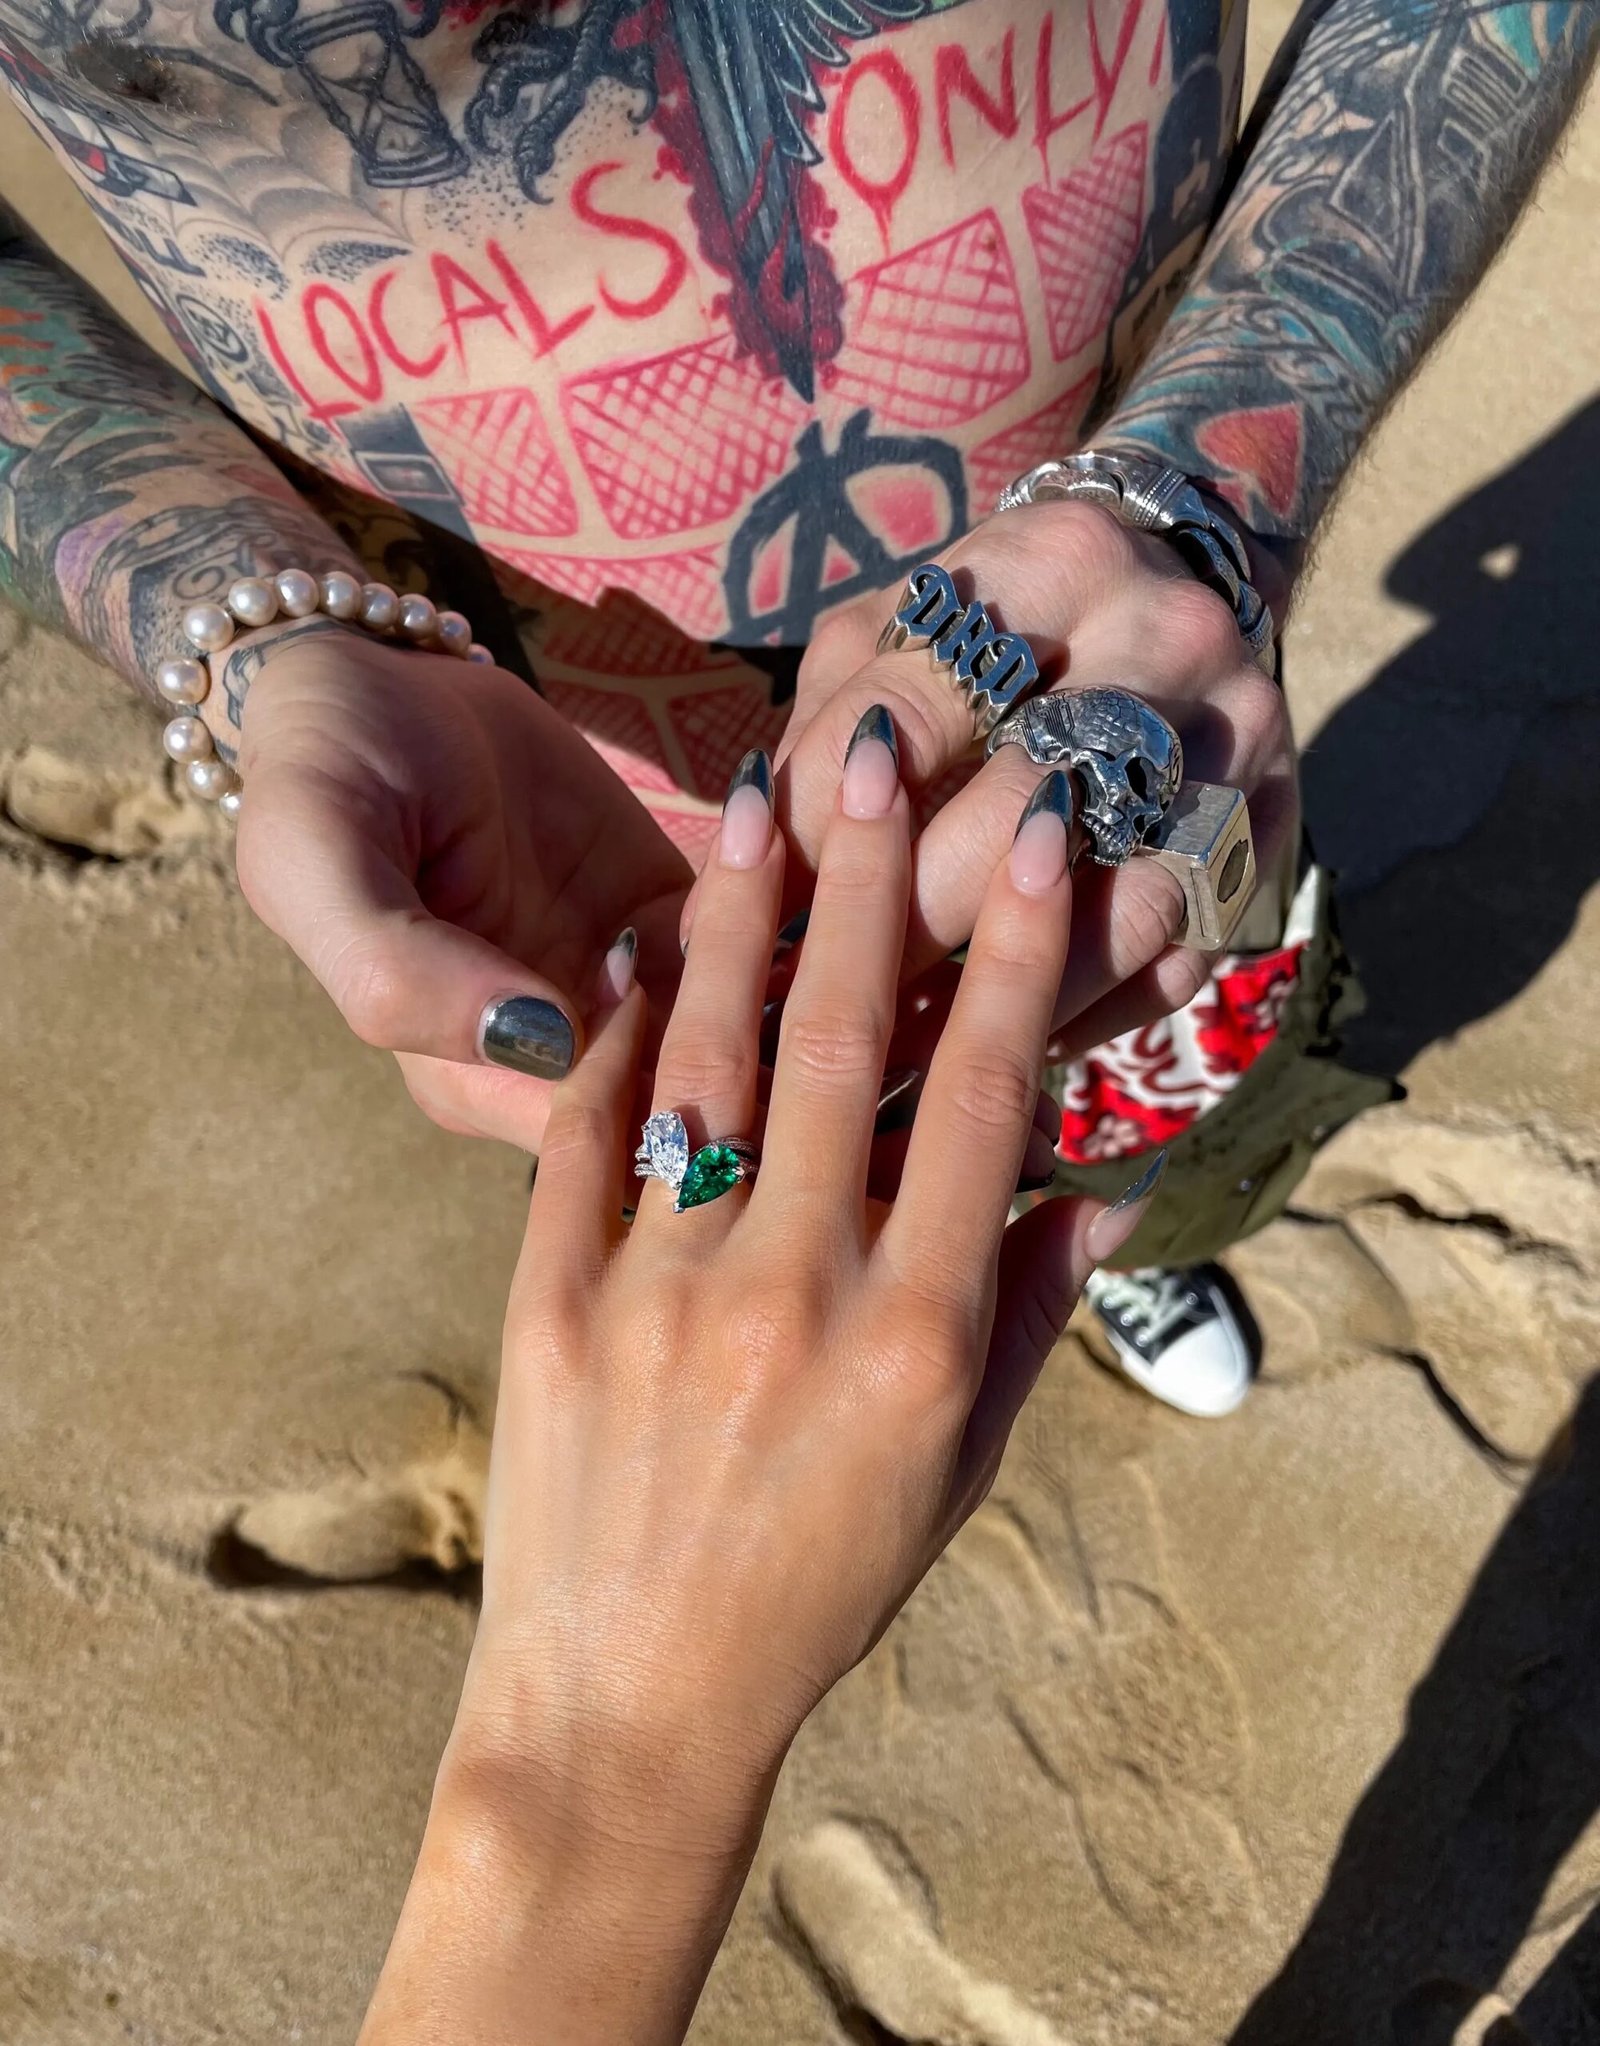 Machine Gun Kelly proposed to Megan Fox with a special ring - See details